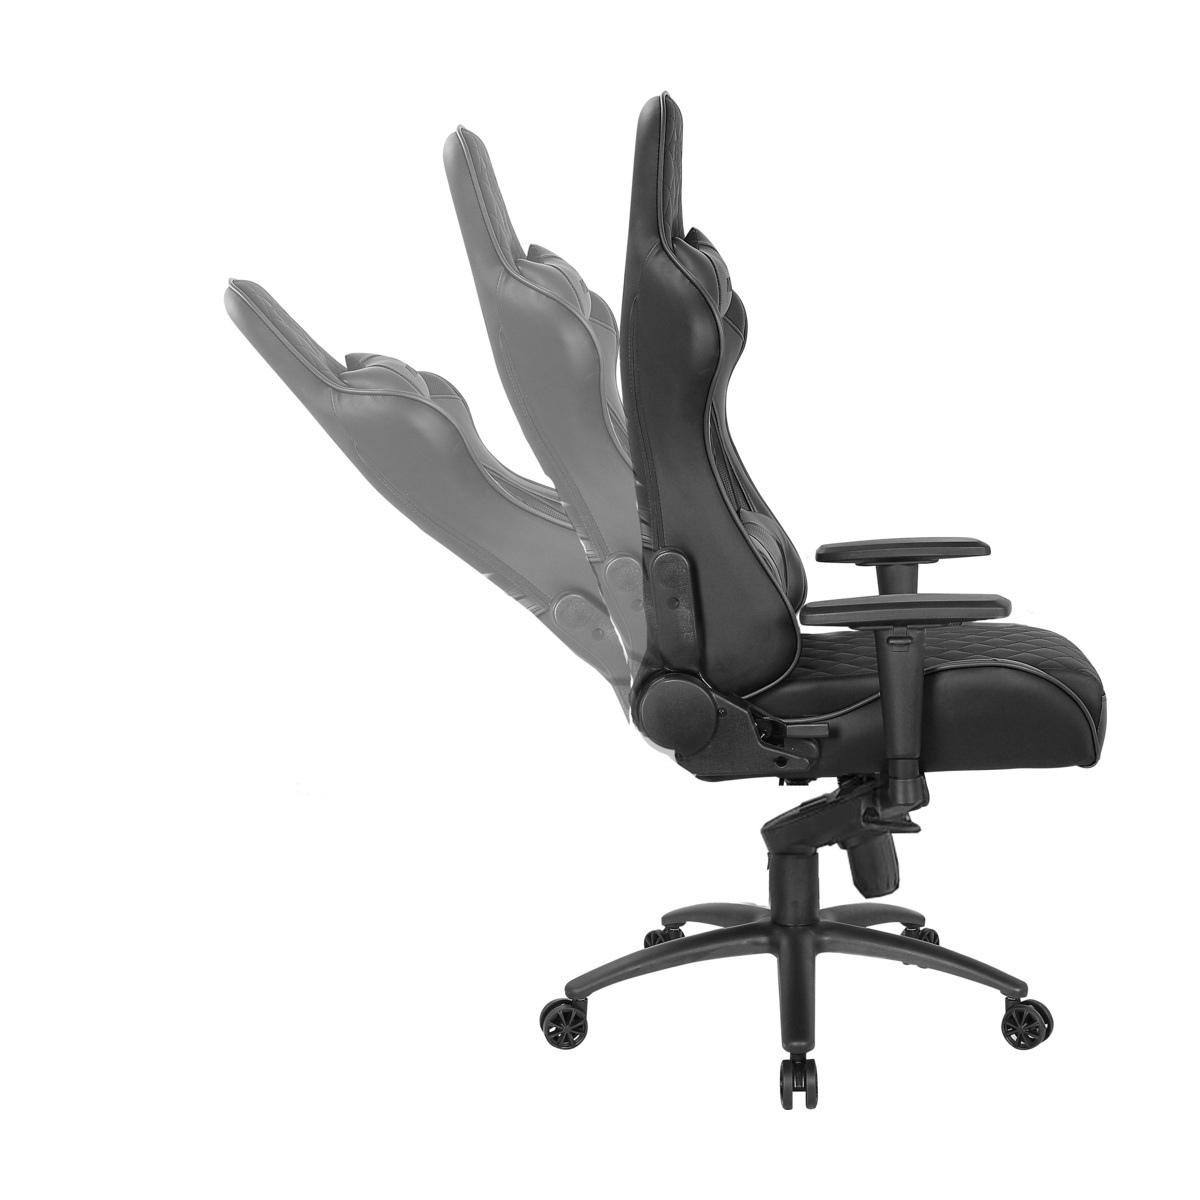 CEPTER ROGUE GAMING CHAIR BLACK - CEPTER